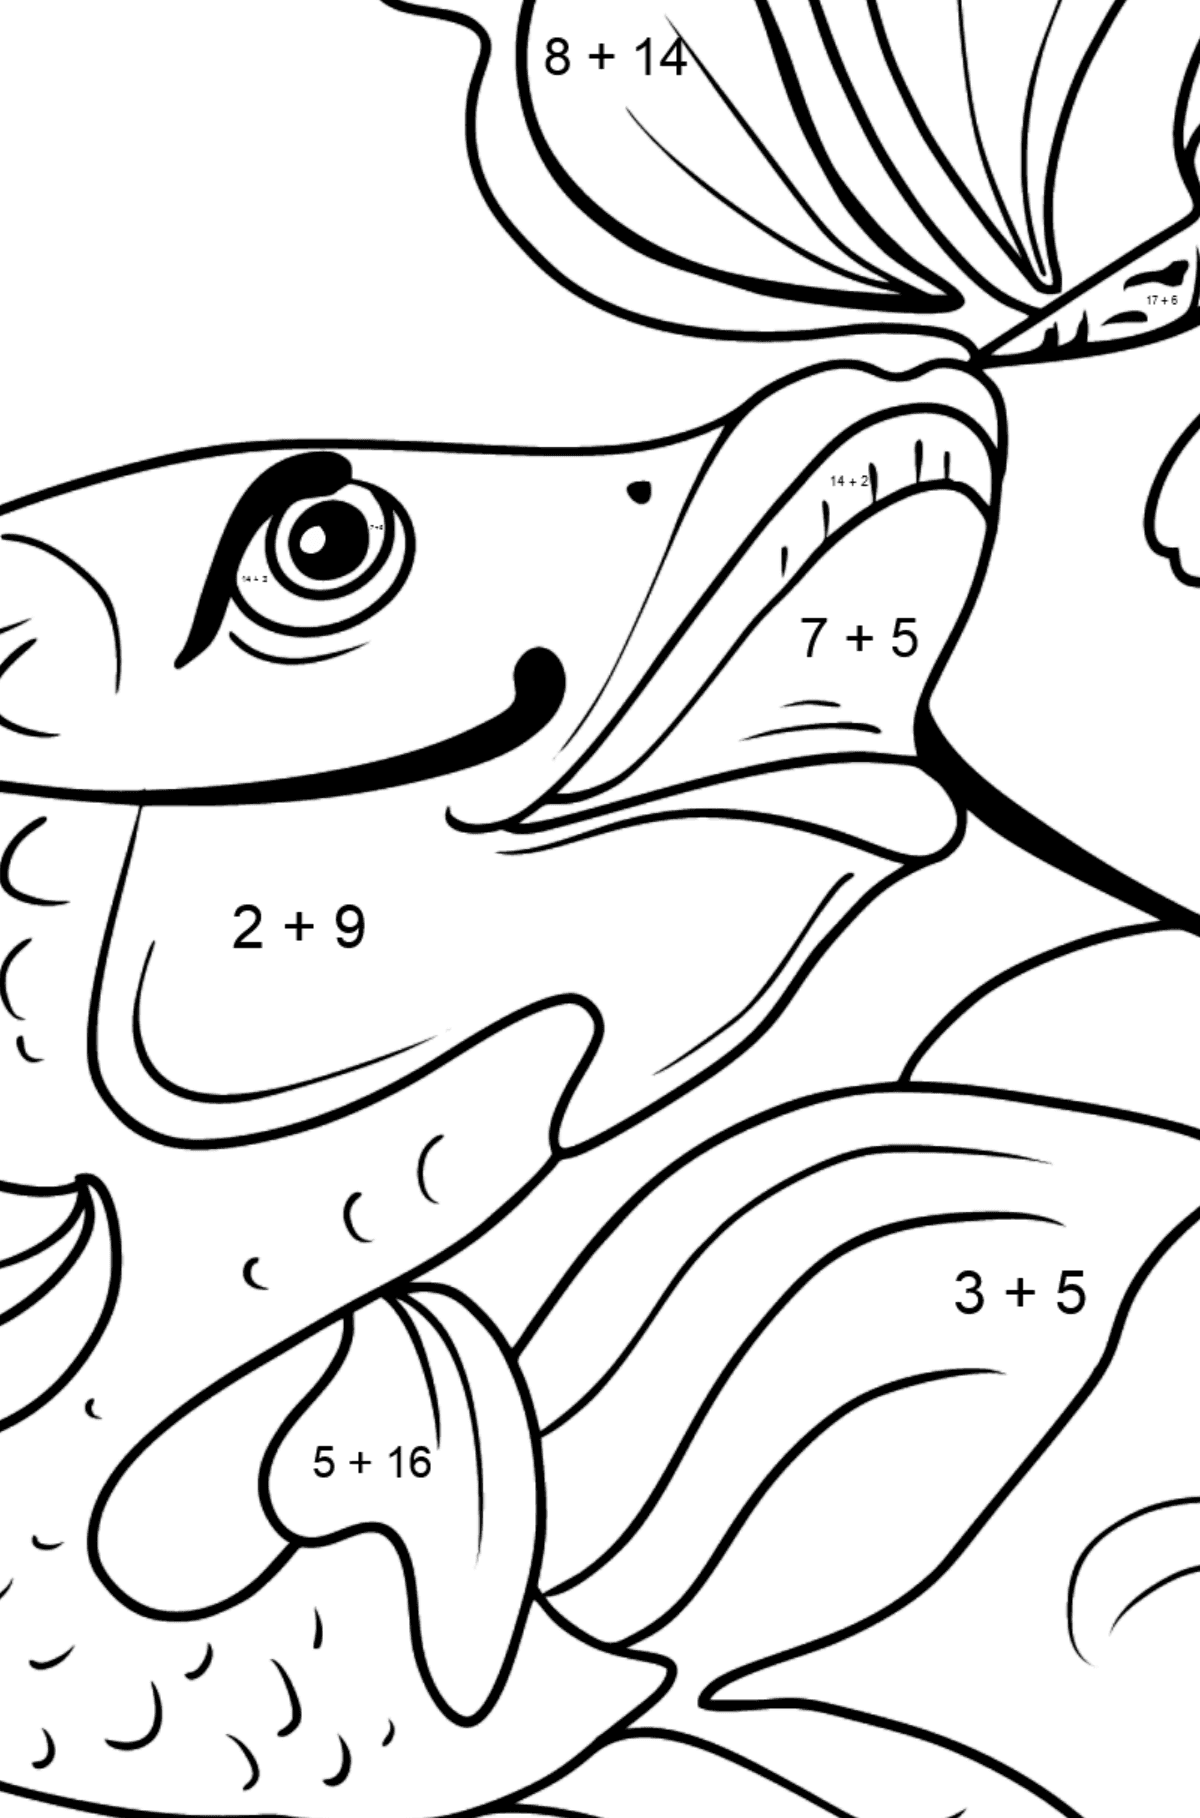 Fish and Butterfly coloring page - Math Coloring - Addition for Kids